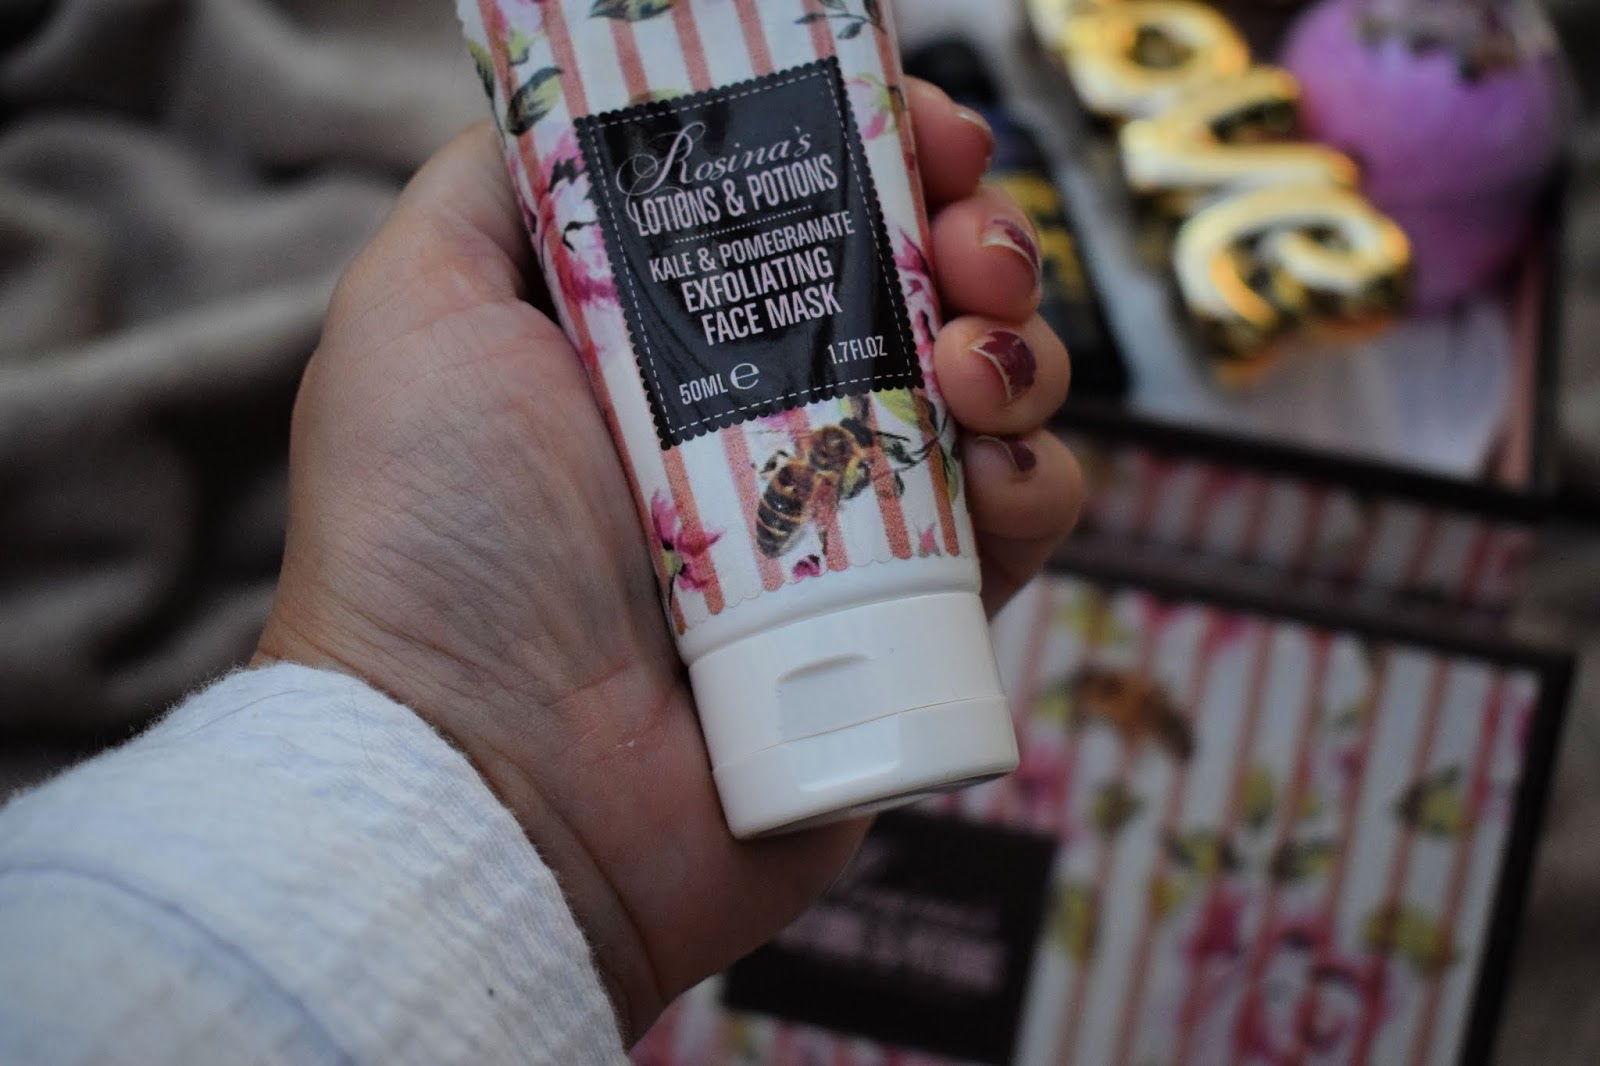 A Rose Scented Pamper with Rosina's Lotions and Potions